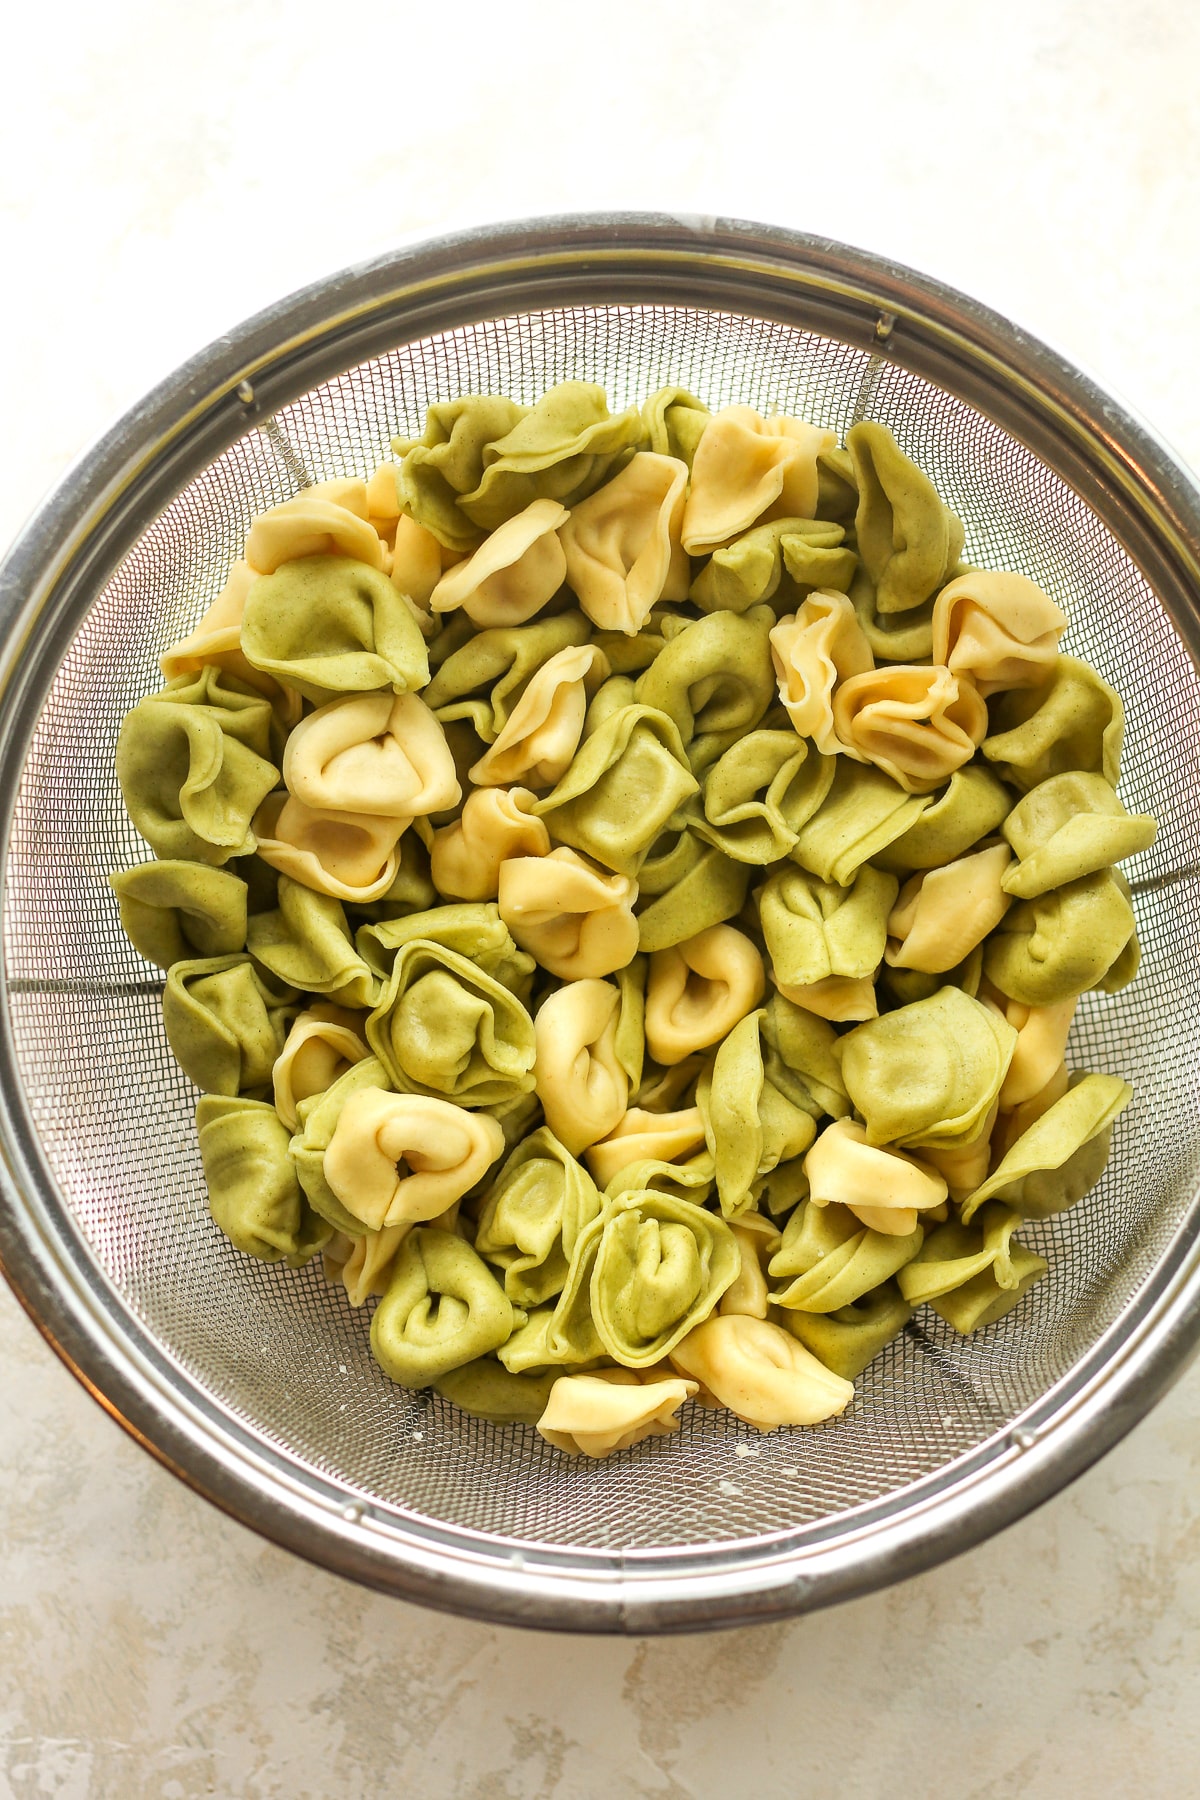 A colander of the cooked tortellini pasta.